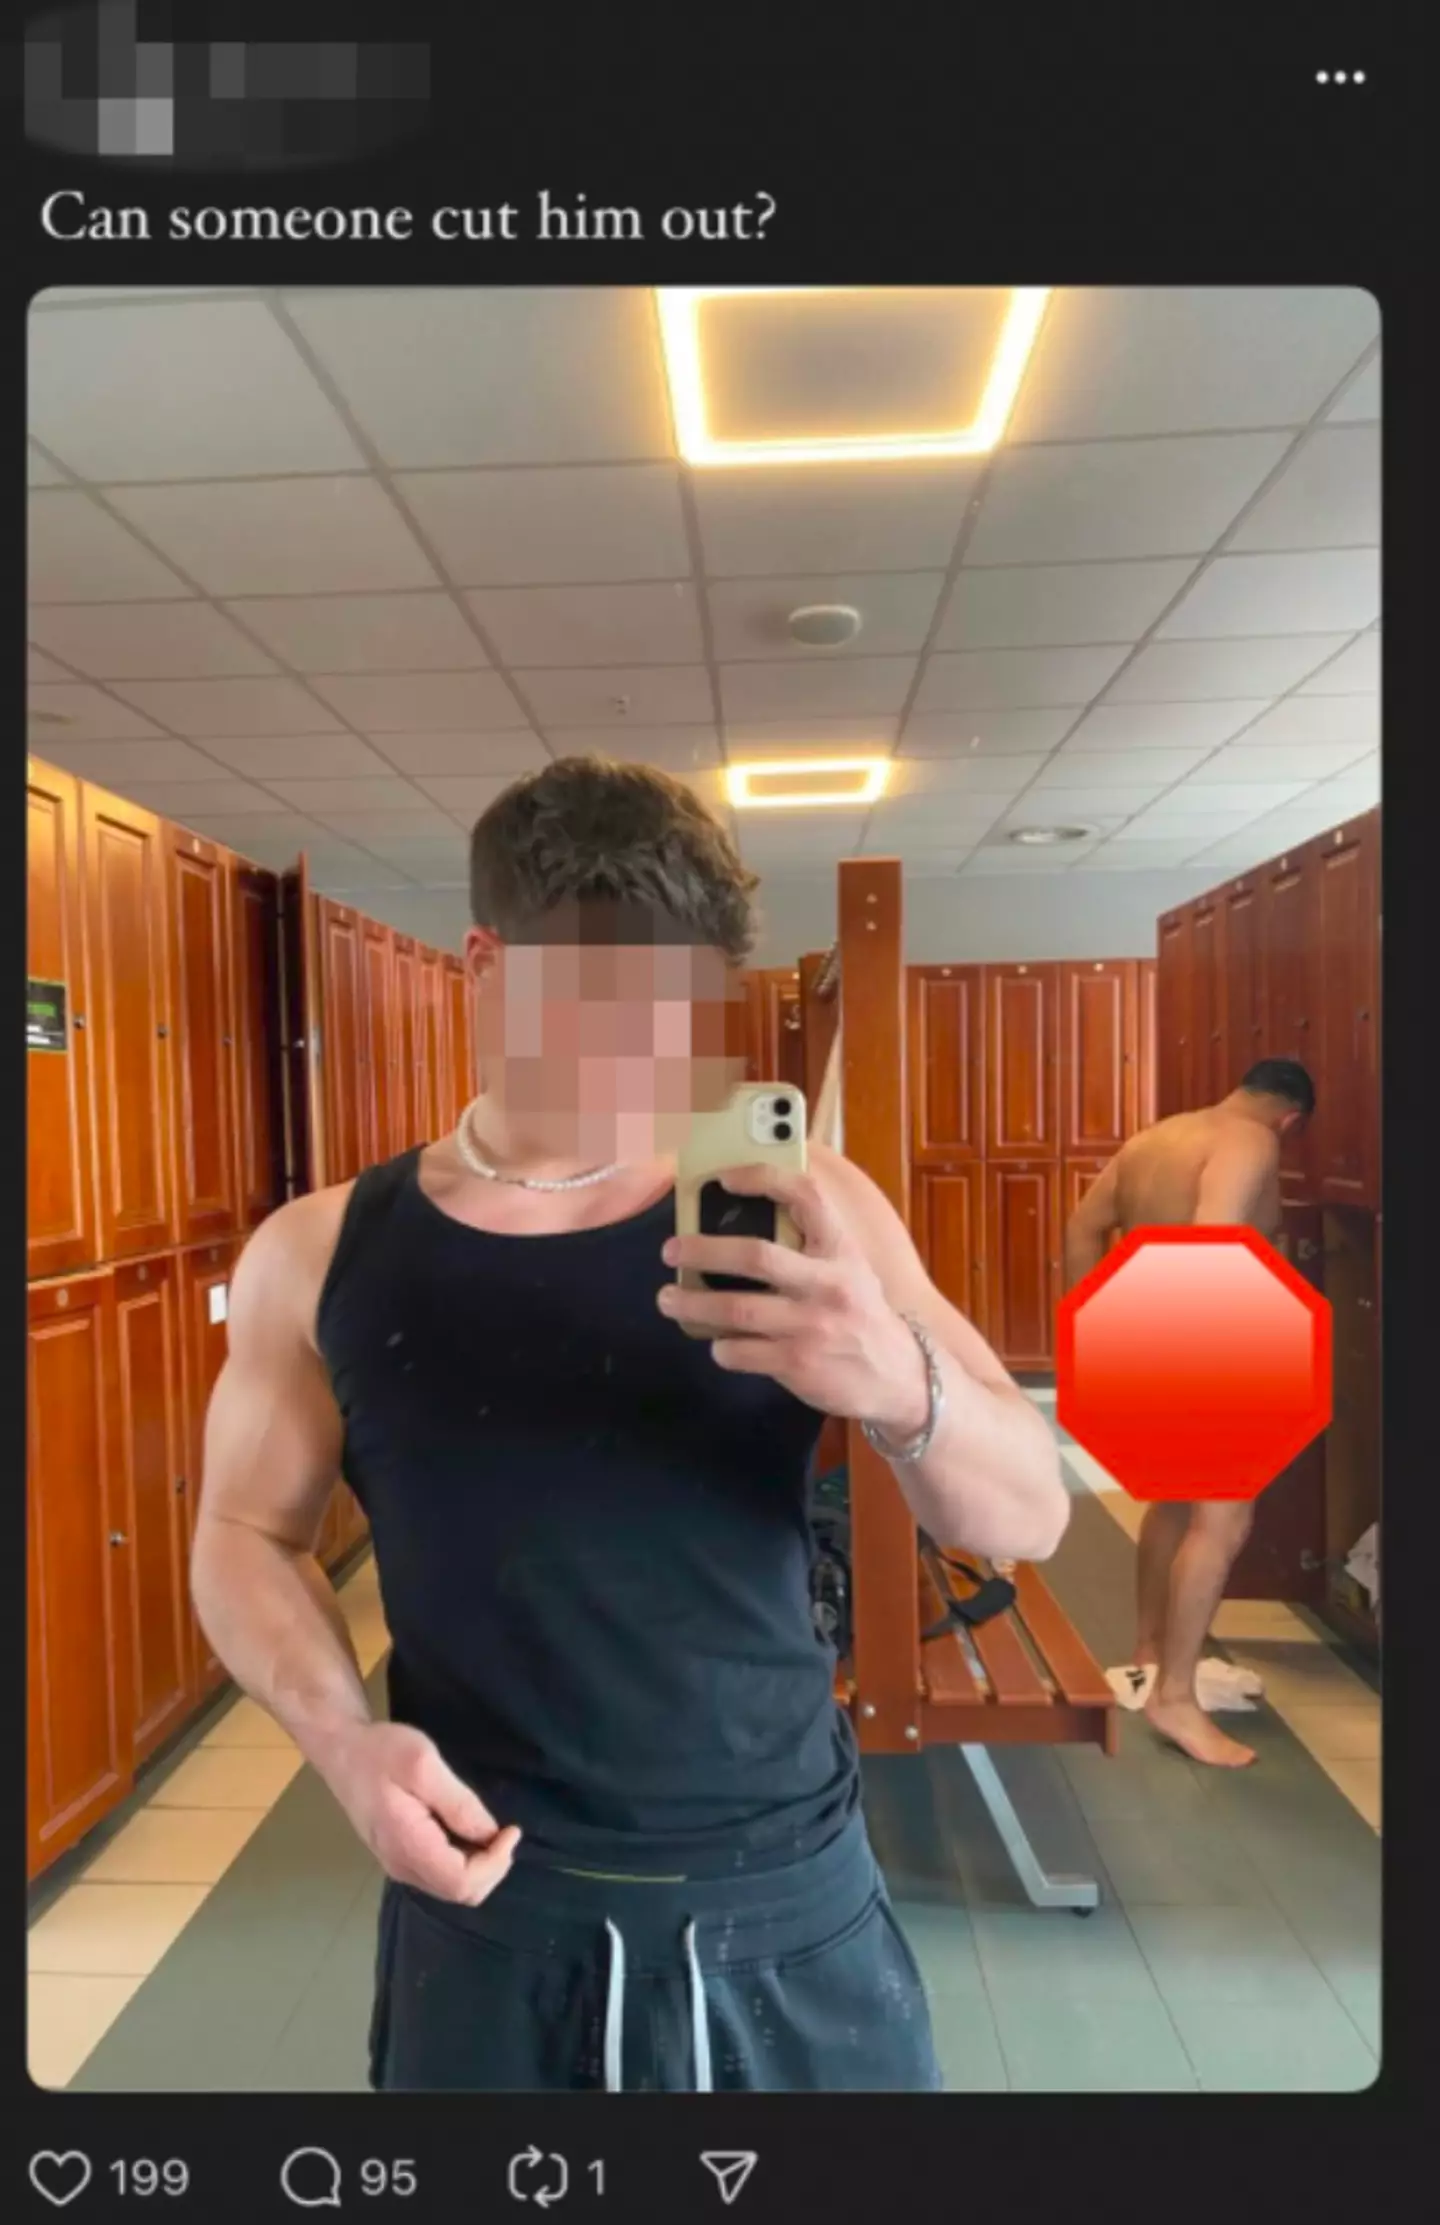 Joey Swoll has hit out at the gym-goer. (X/@TheJoeySwoll)